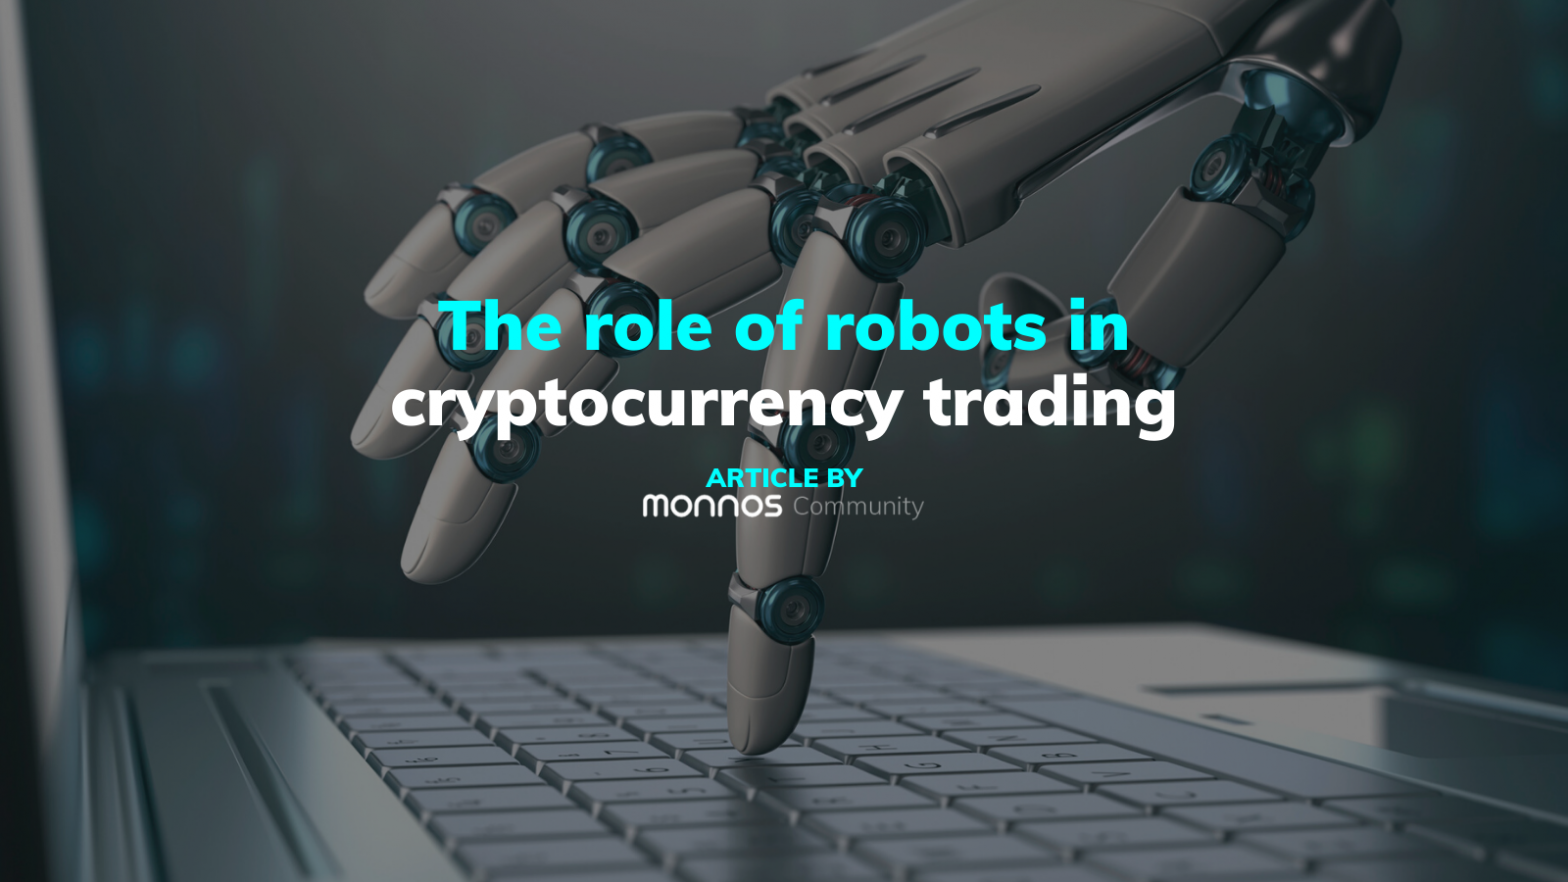 The role of robots in cryptocurrency trading